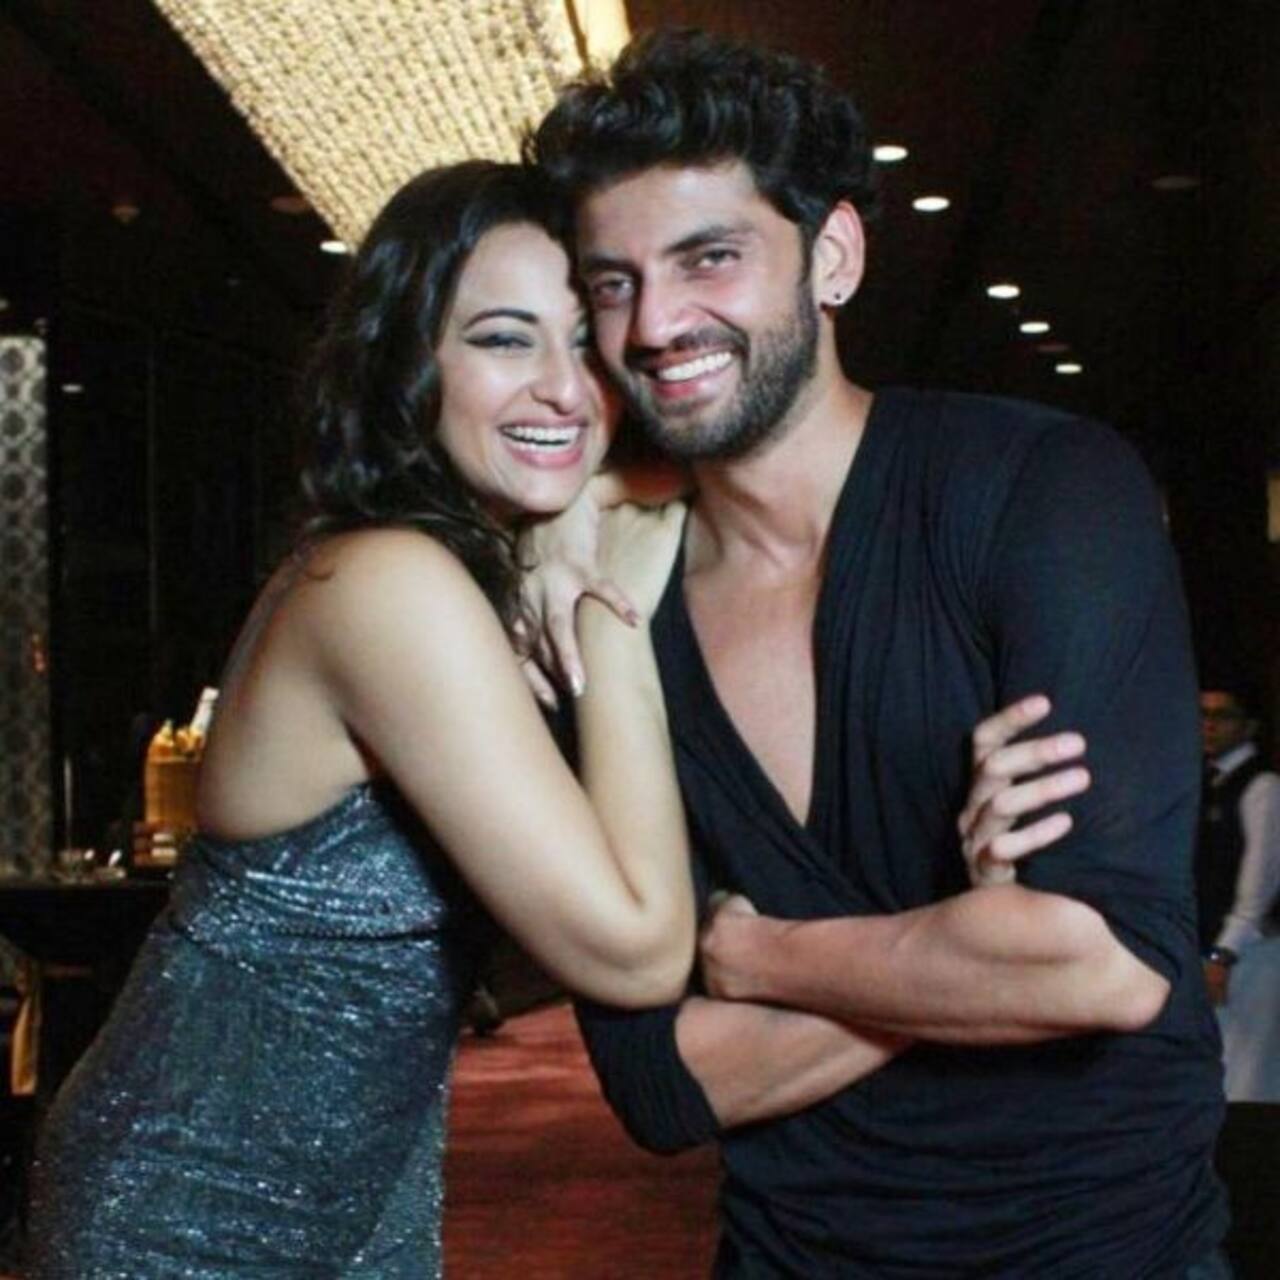 Sonakshi Sinha, Zaheer Iqbal to get married this year after making their relationship public?